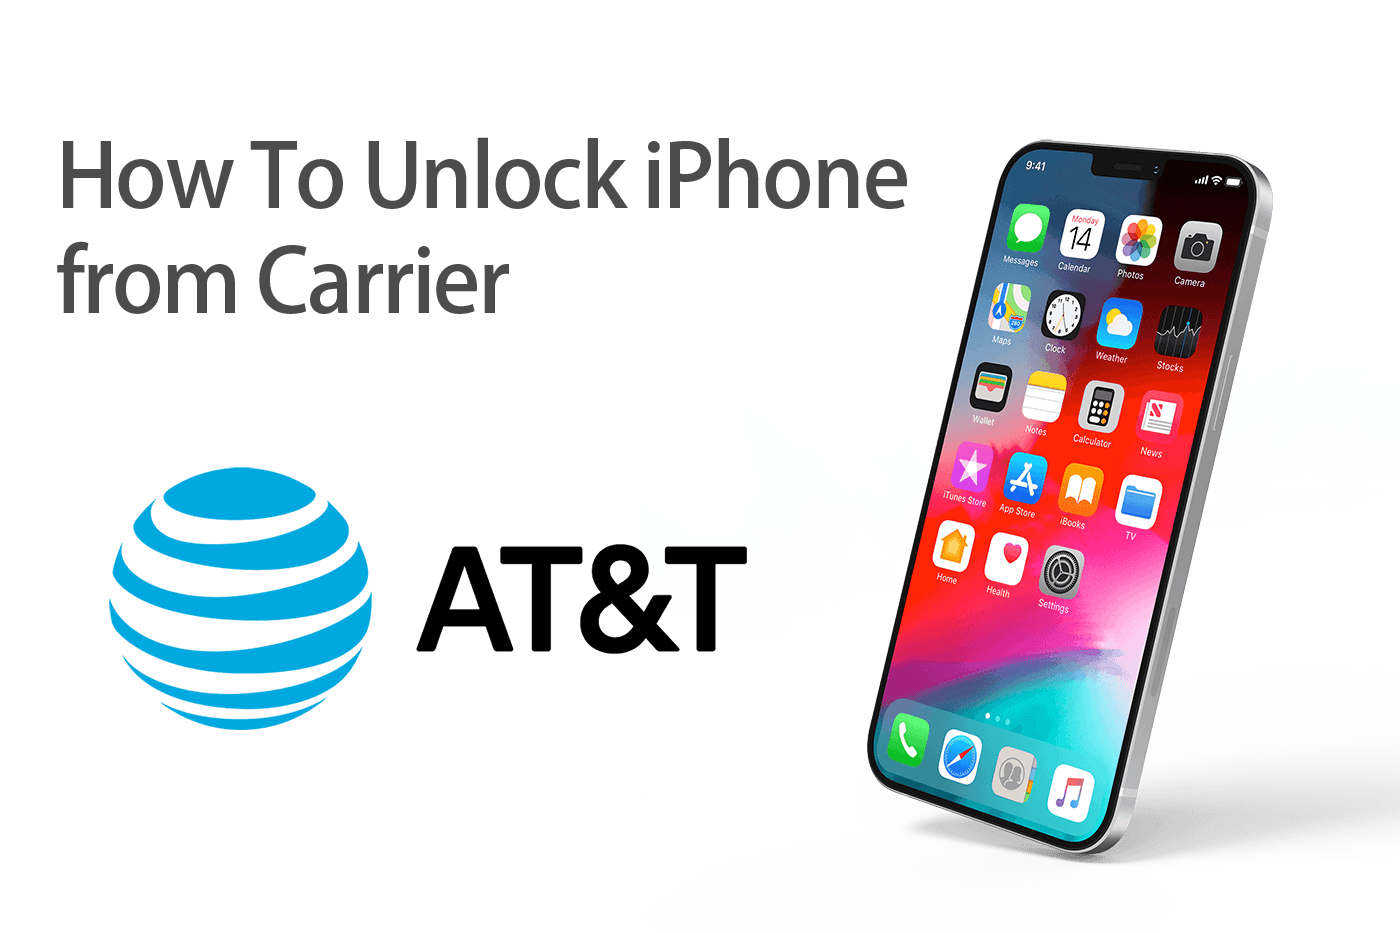 How Long Does It Take To Unlock iPhone from Carrier